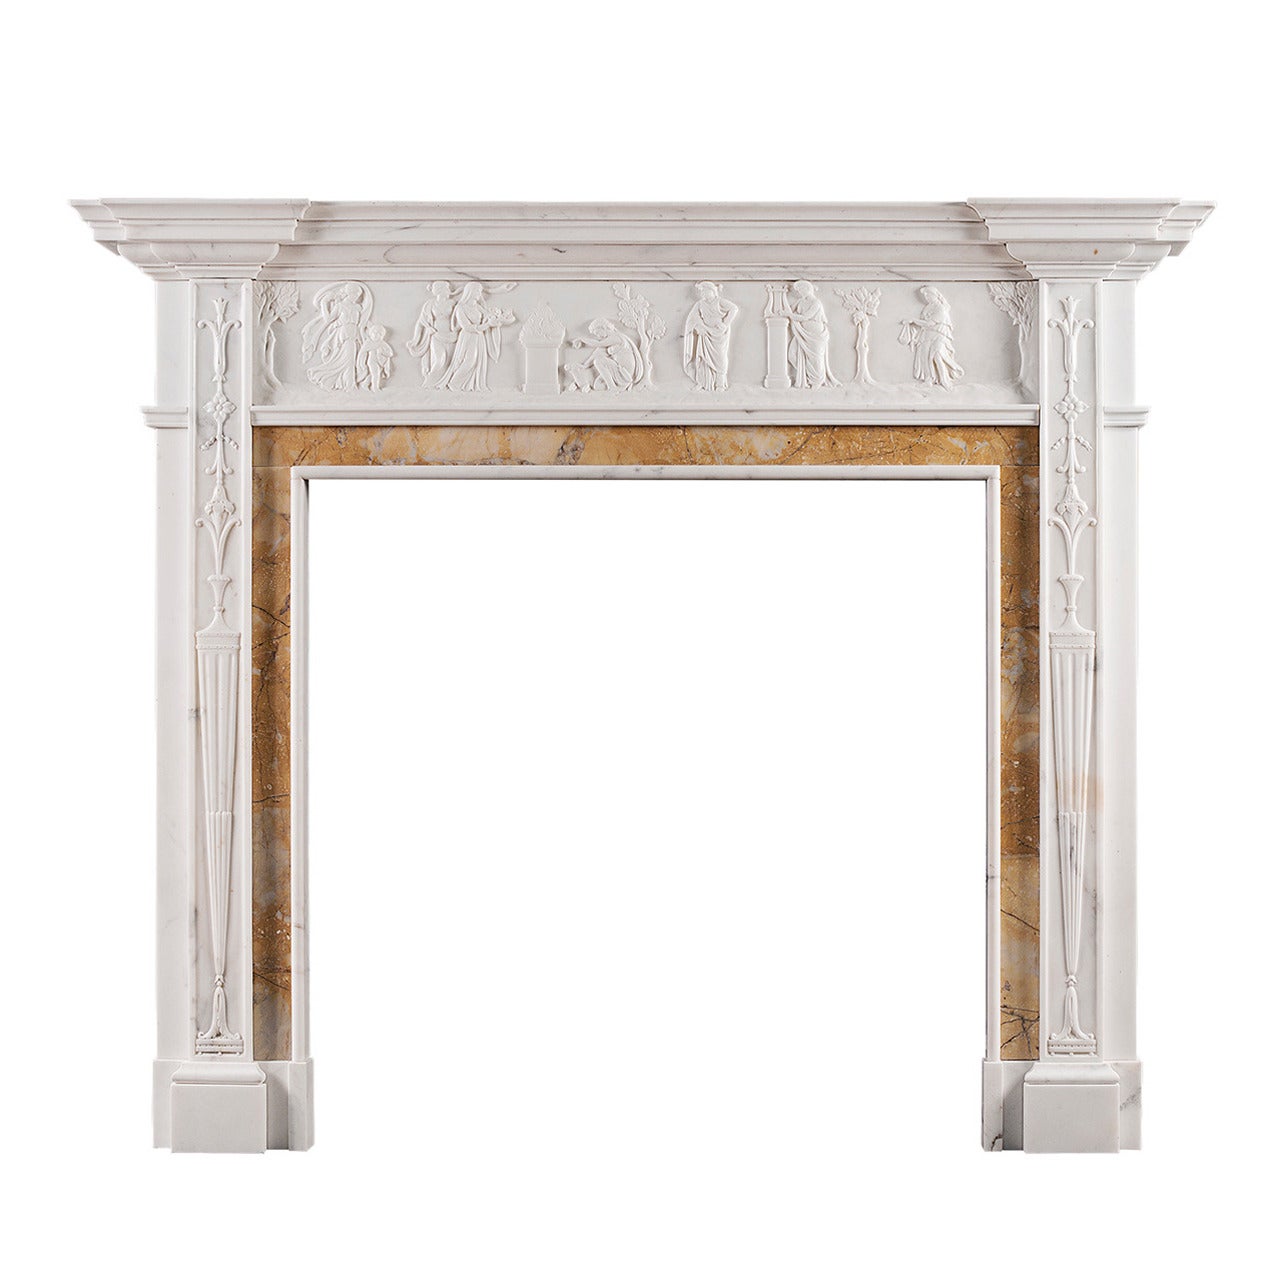 Neoclassical English Statuary Marble Fireplace Mantel with Siena Inlay